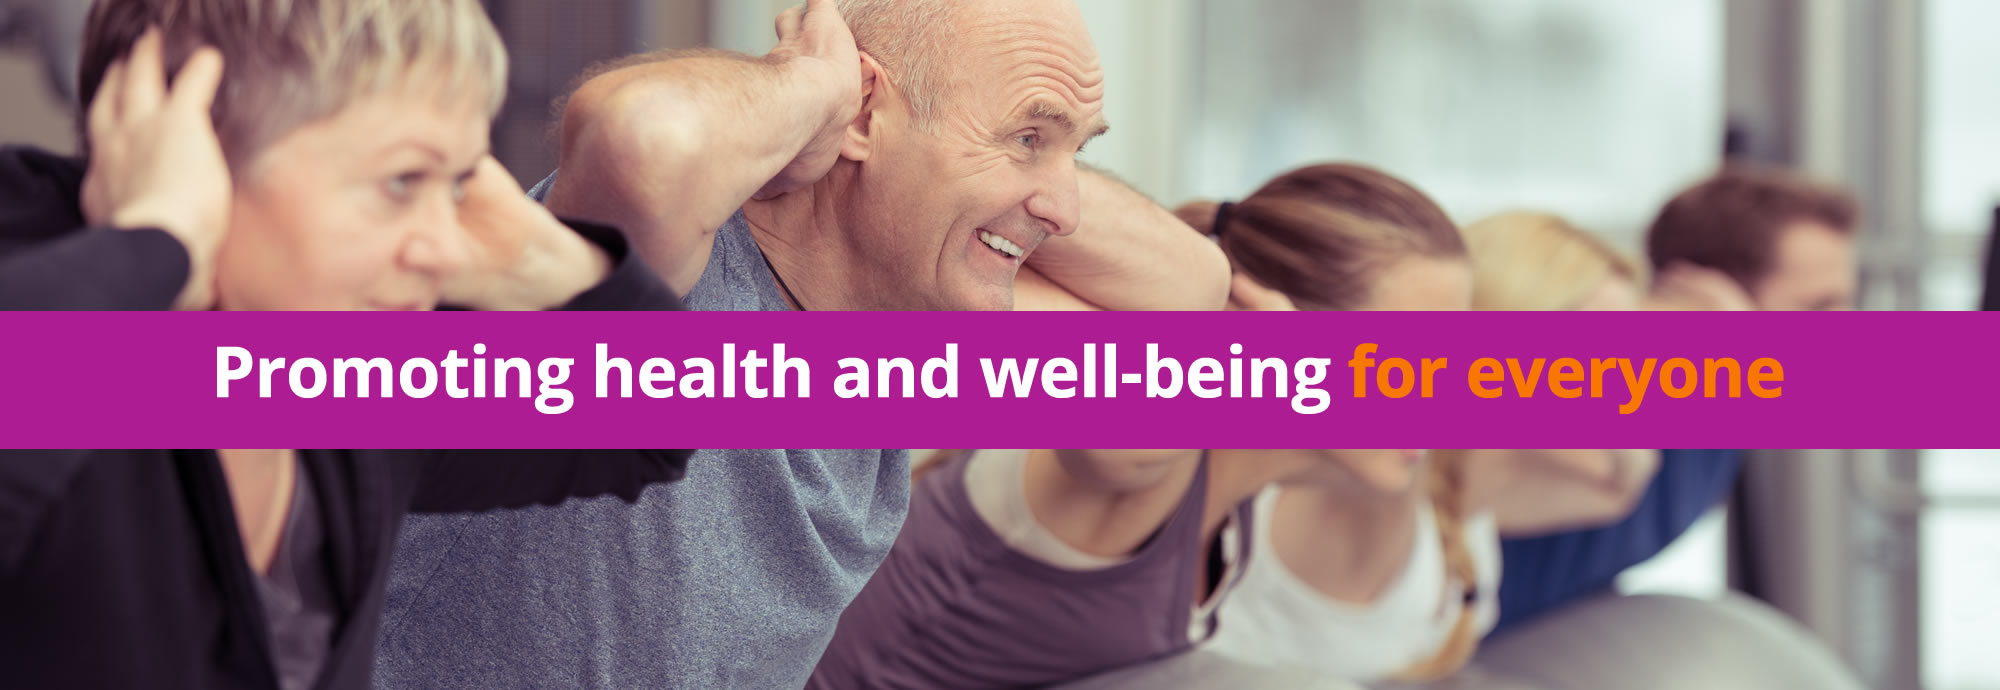 Paul Devlin Fitness and Well-being - Promoting health and Well-being for everyone